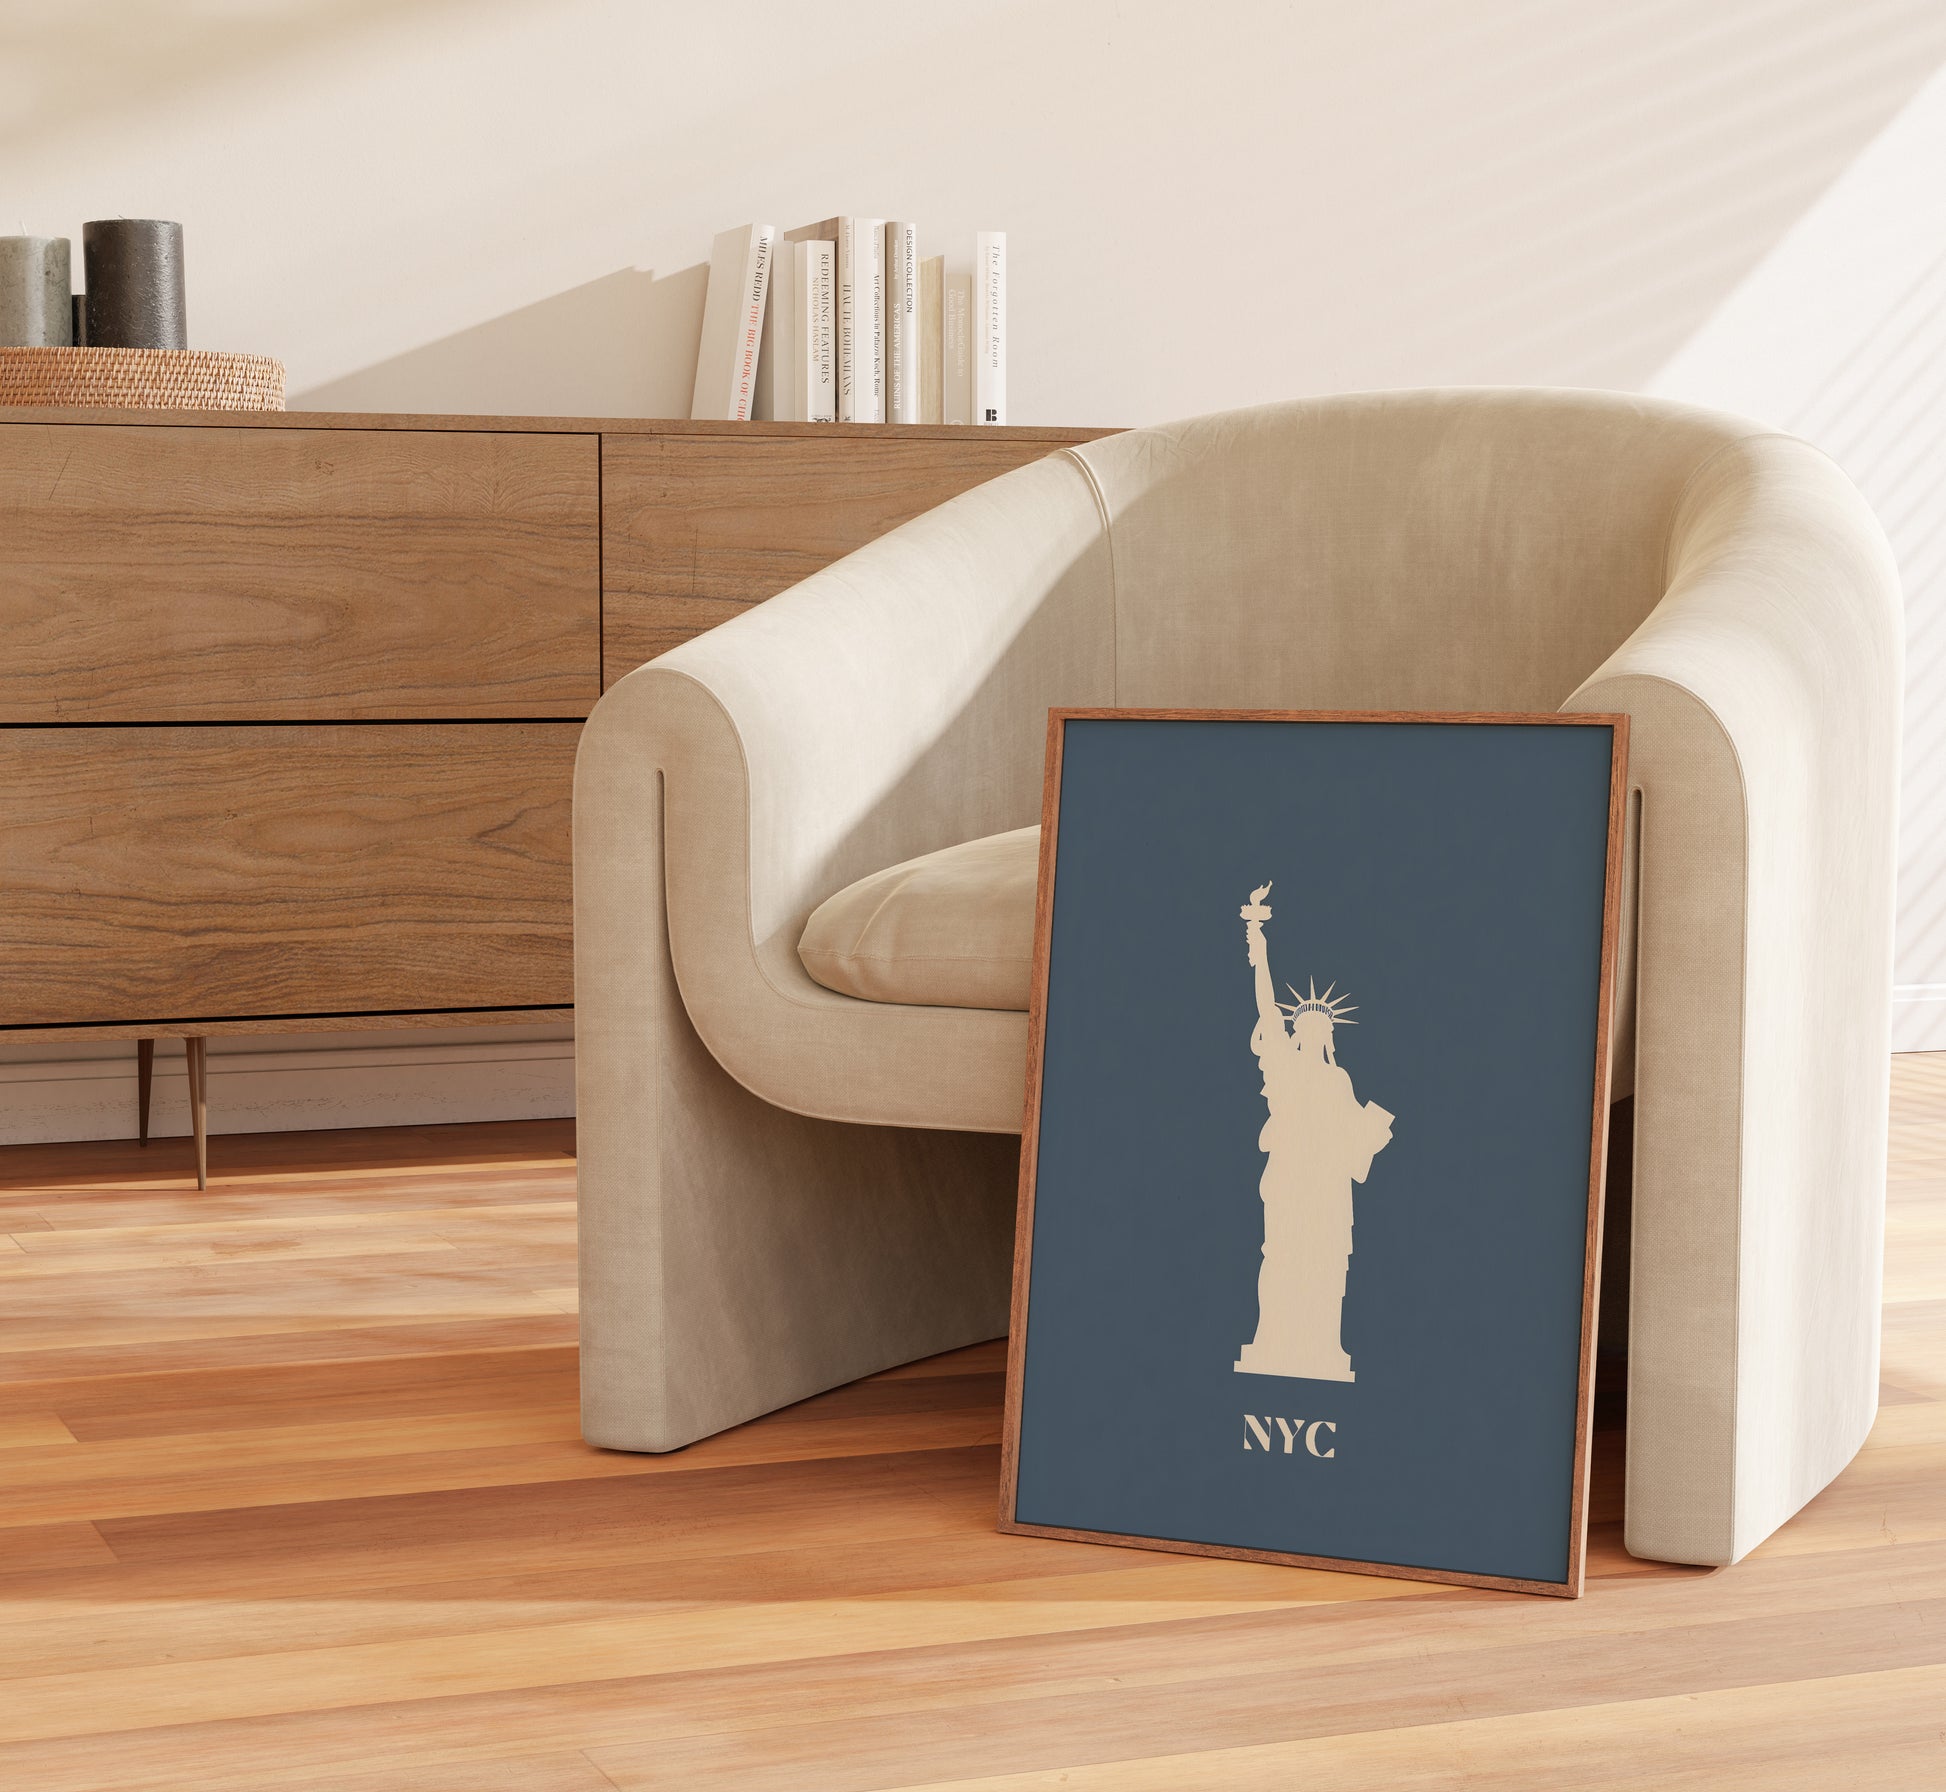 Modern chair and wooden cabinet with framed Statue of Liberty poster.